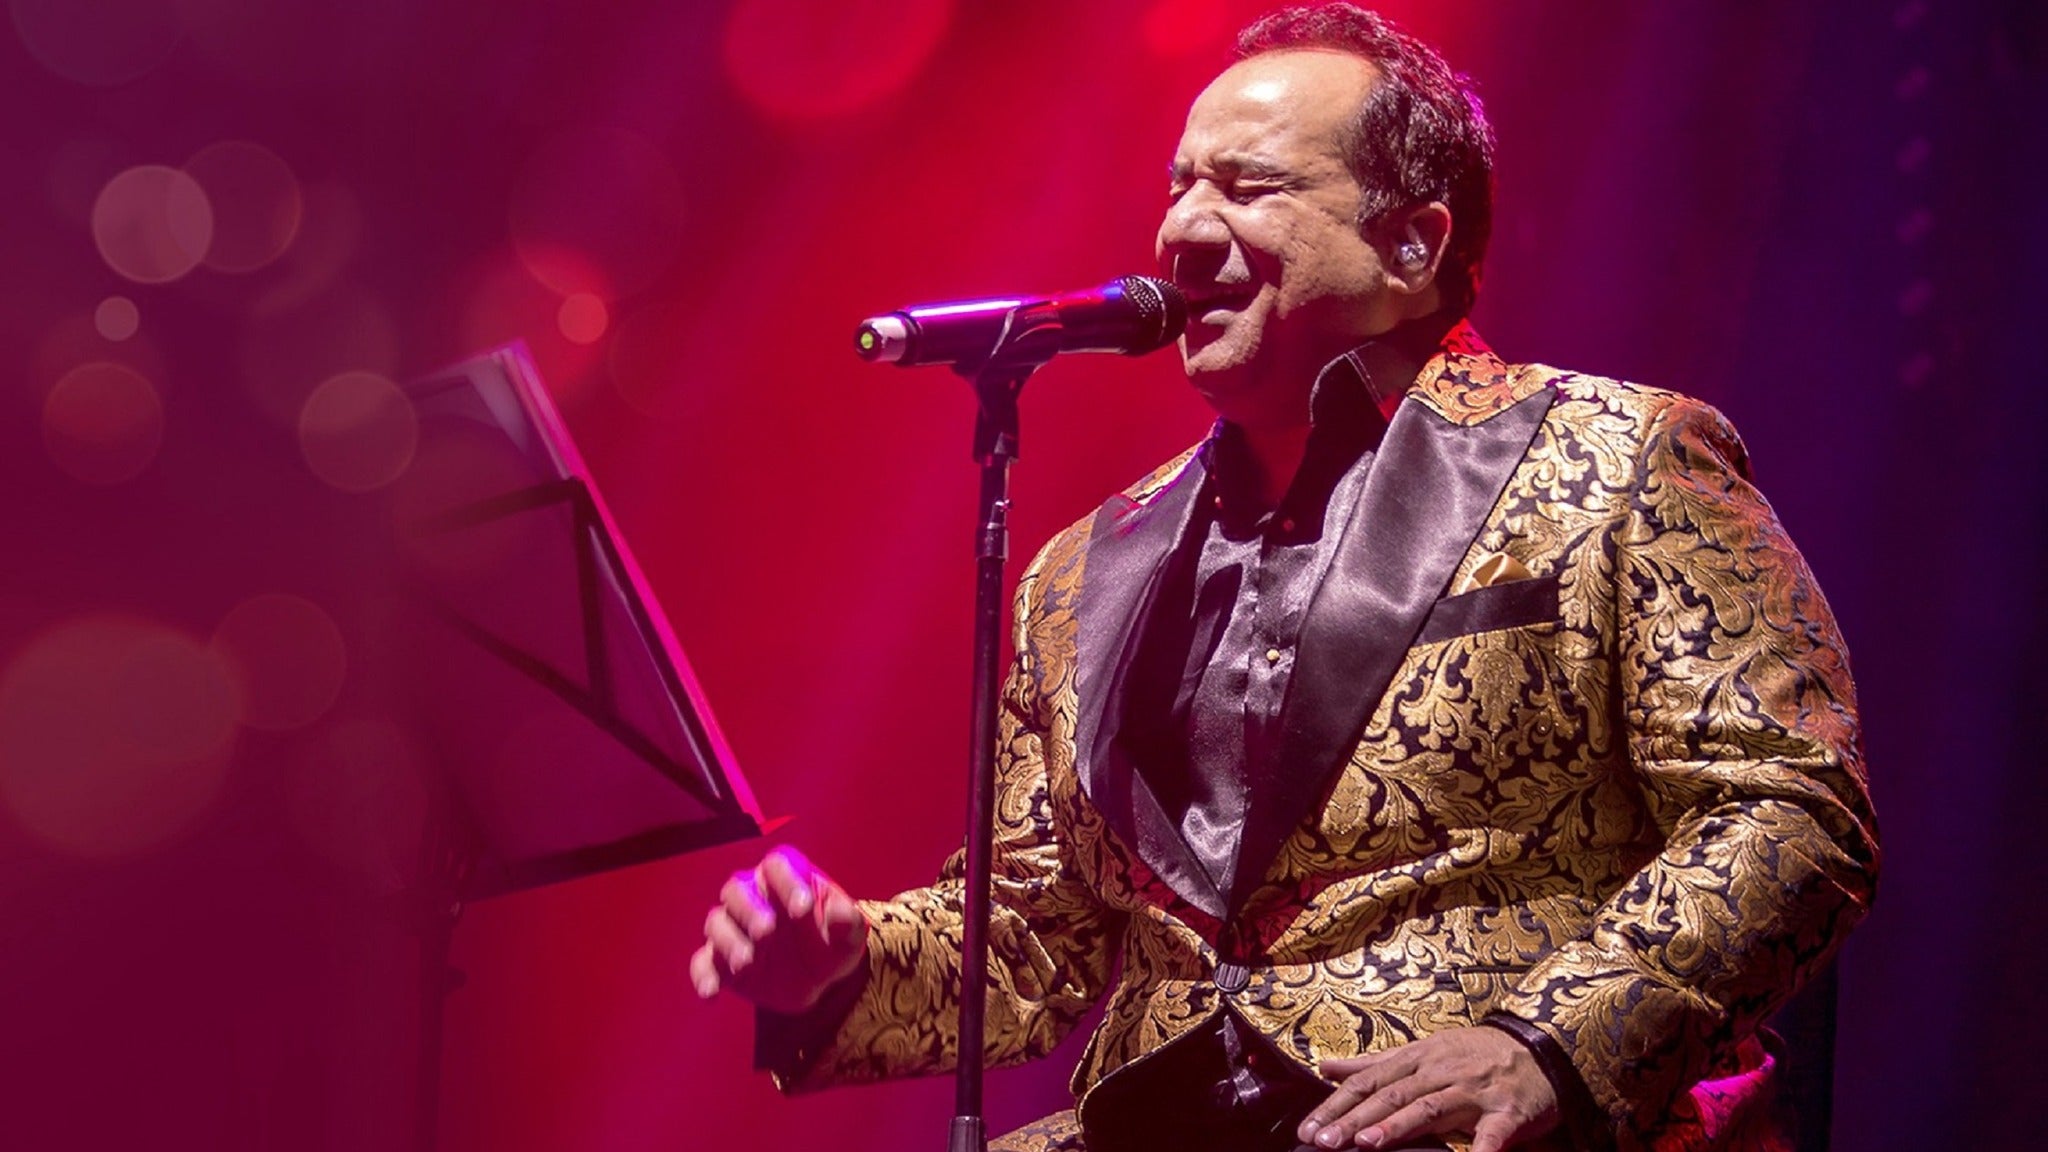 Up Close And Personal With Rahat Fateh Ali Khan